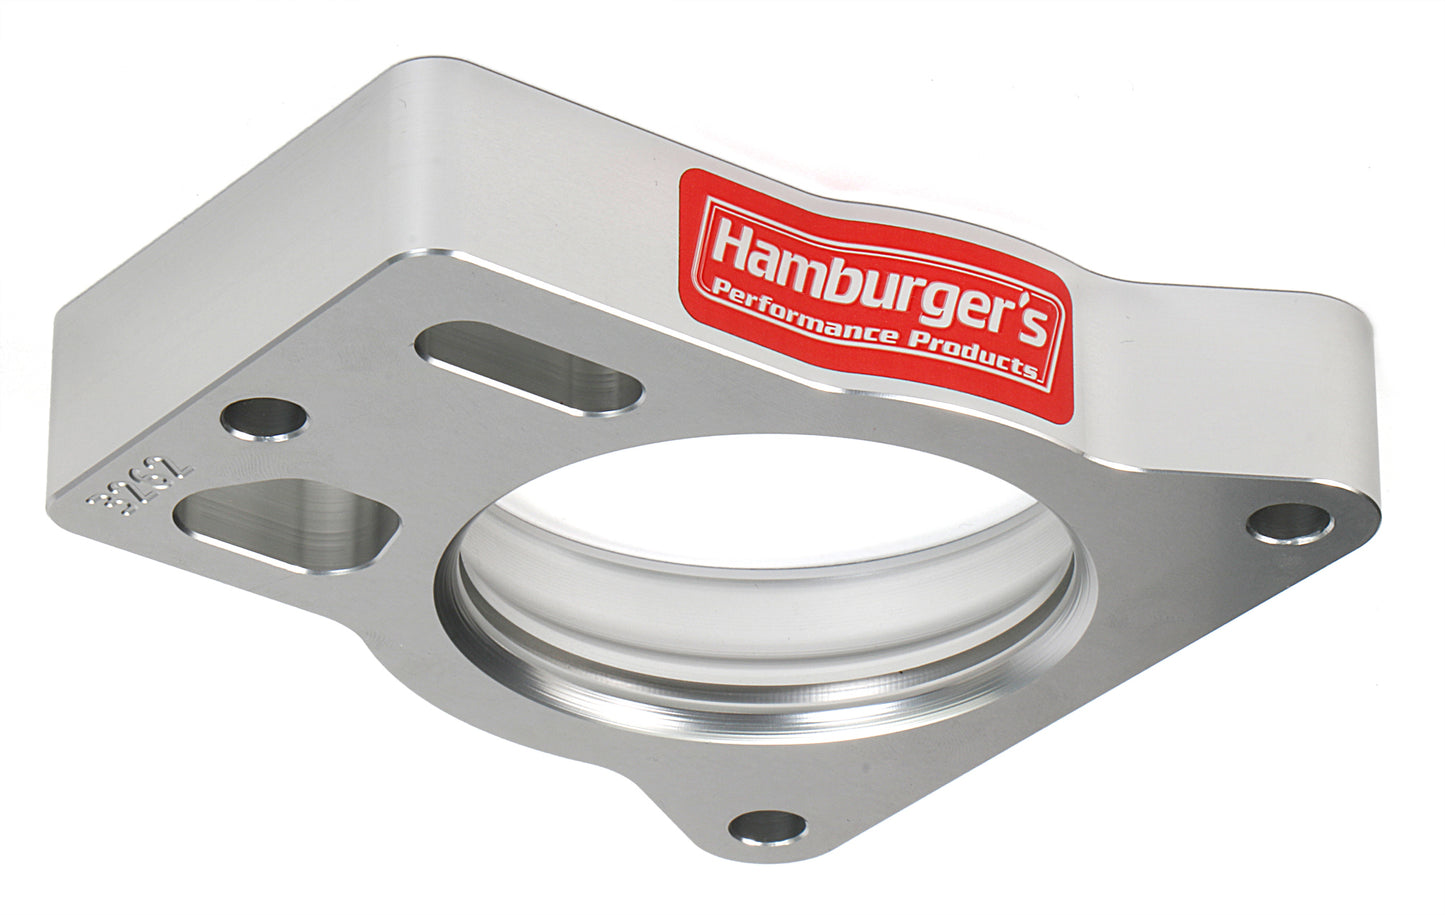 HAMBURGER'S PERFORMANCE PRODUCTS BILLET ALUMINUM TORQUE-CURVE MPFI SPACER FOR 1999-06 CHEVY/GMC TRUCKS AND SUVS CADILLAC ESCALADE HUMMER H2 OR MOTORHOME WITH 4.8L 5.3L 6.0L OR 8.1L ENGINE 3262